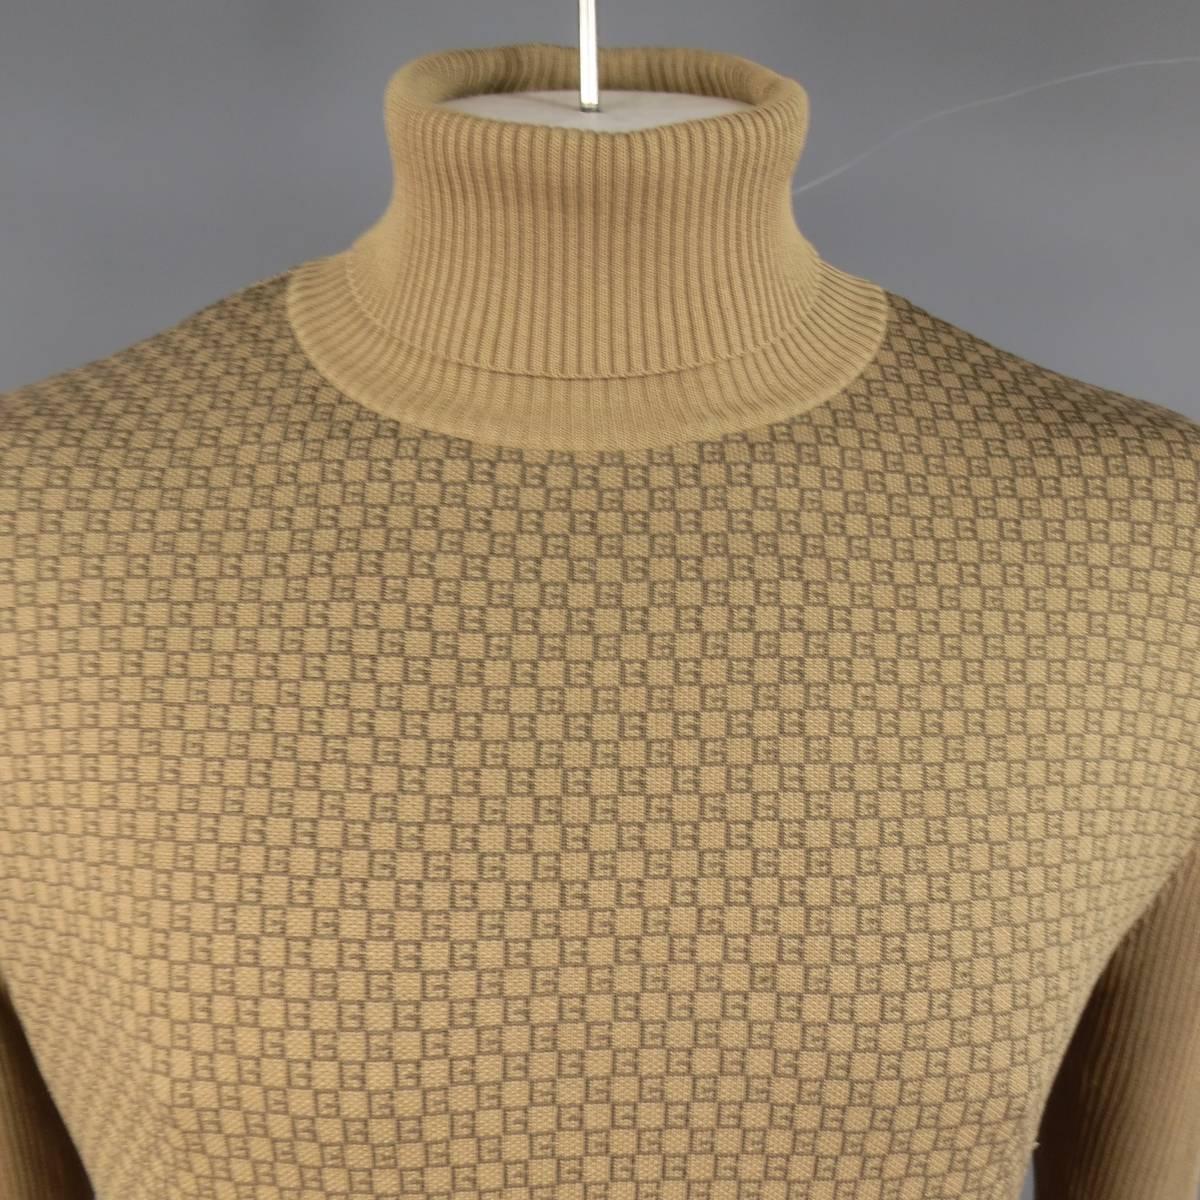 Golden tan khaki ribbed silk print turtleneck sweater by GUCCI featuring a frontal brown G monogram print panel. Made in Italy.
 
Excellent Pre-Owned Condition.
Marked: L
 
Measurements:
 
Shoulder: 21 in.
Chest: 48 in.
Sleeve: 27